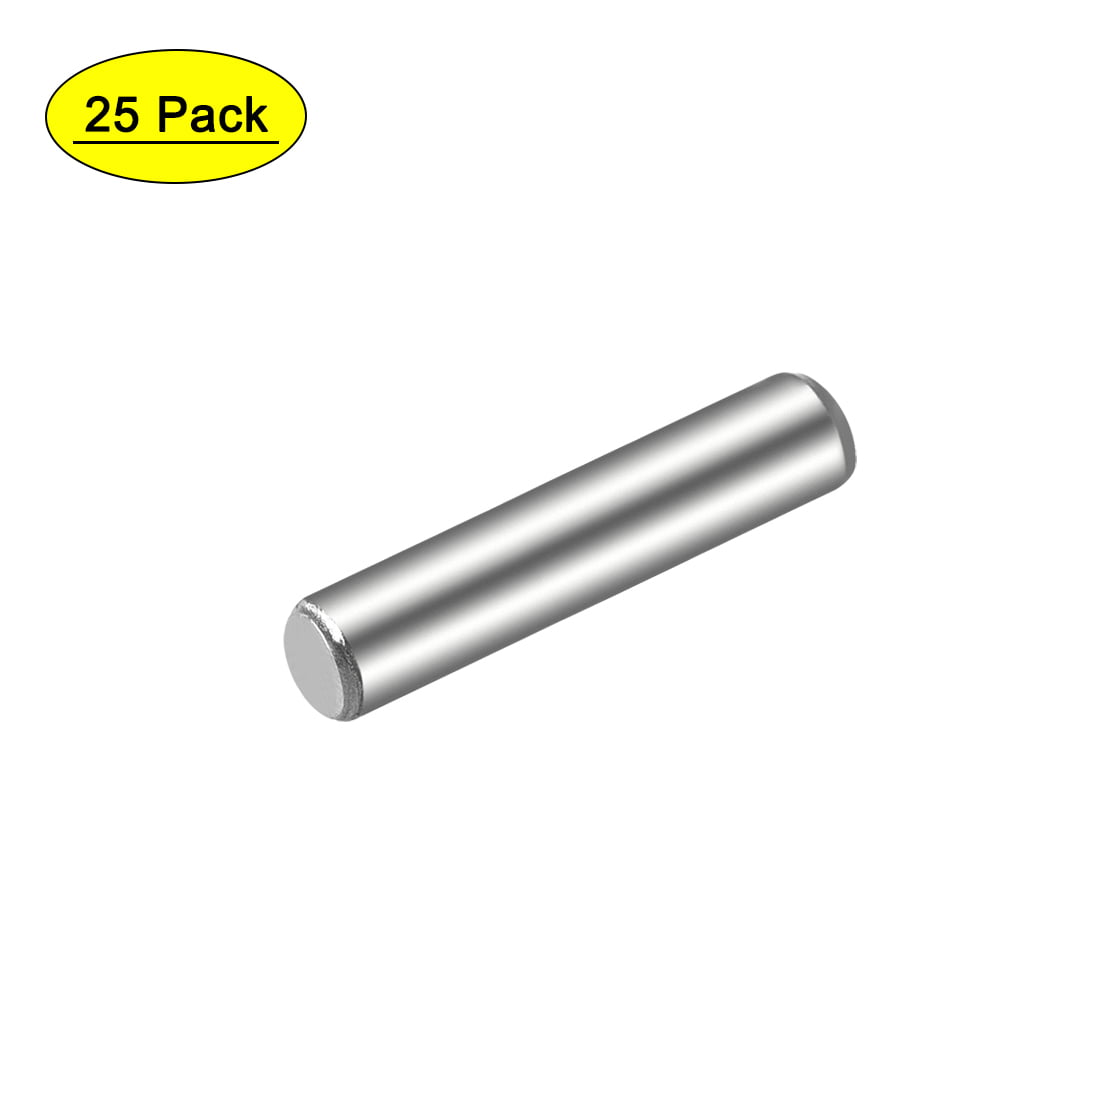 uxcell 100Pcs 2mm x 4mm Dowel Pin 304 Stainless Steel Wood Bunk Bed Dowel Pins Shelf Pegs Support Shelves Silver Tone